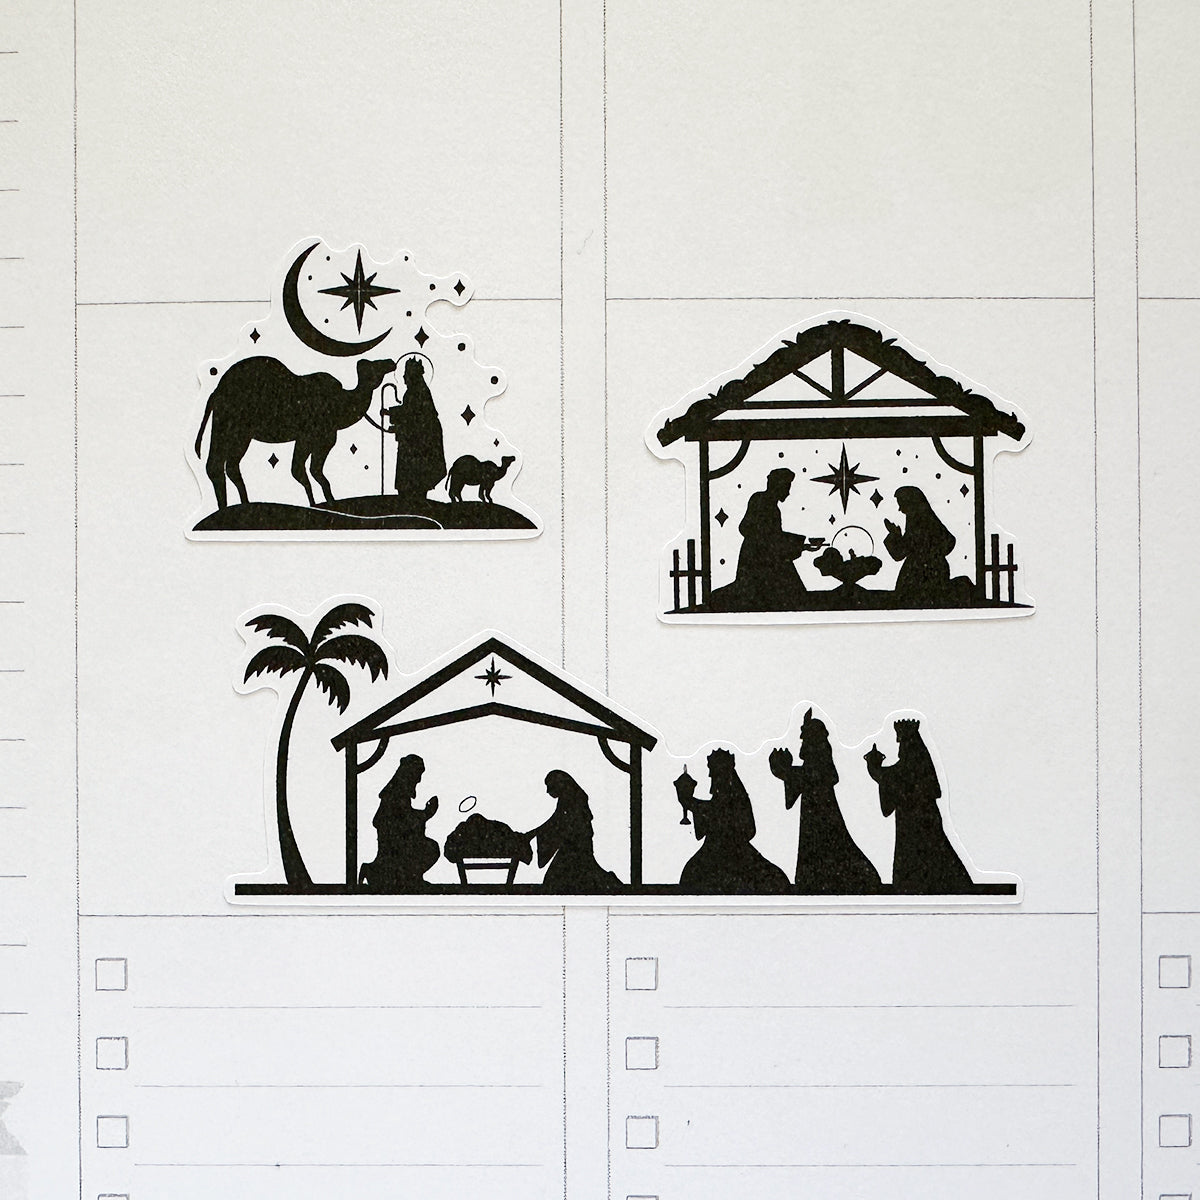 Christmas Nativity Scenes Silhouettes Planner Stickers by Closet Planner Addict (S-702)